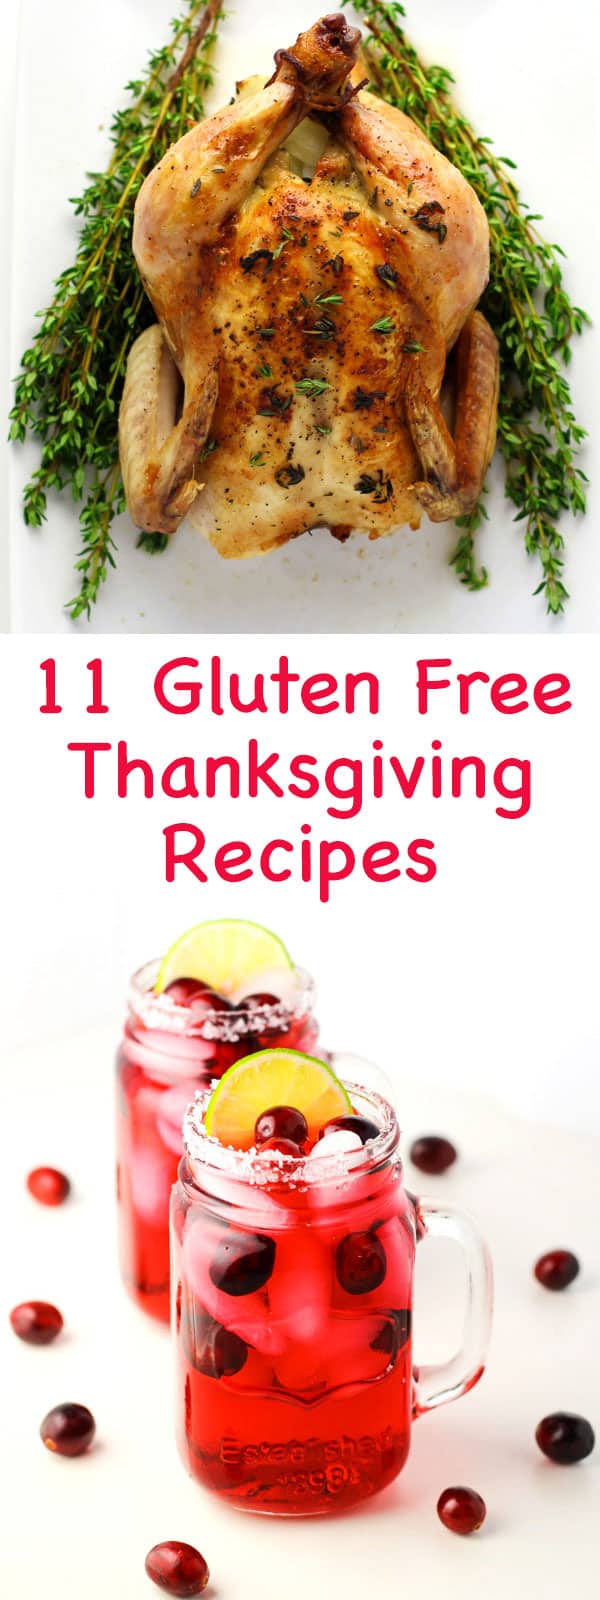 11 Gluten Free Thanksgiving Recipes, everything from Appetizers, Side Dishes, Main Dishes, to Drinks!